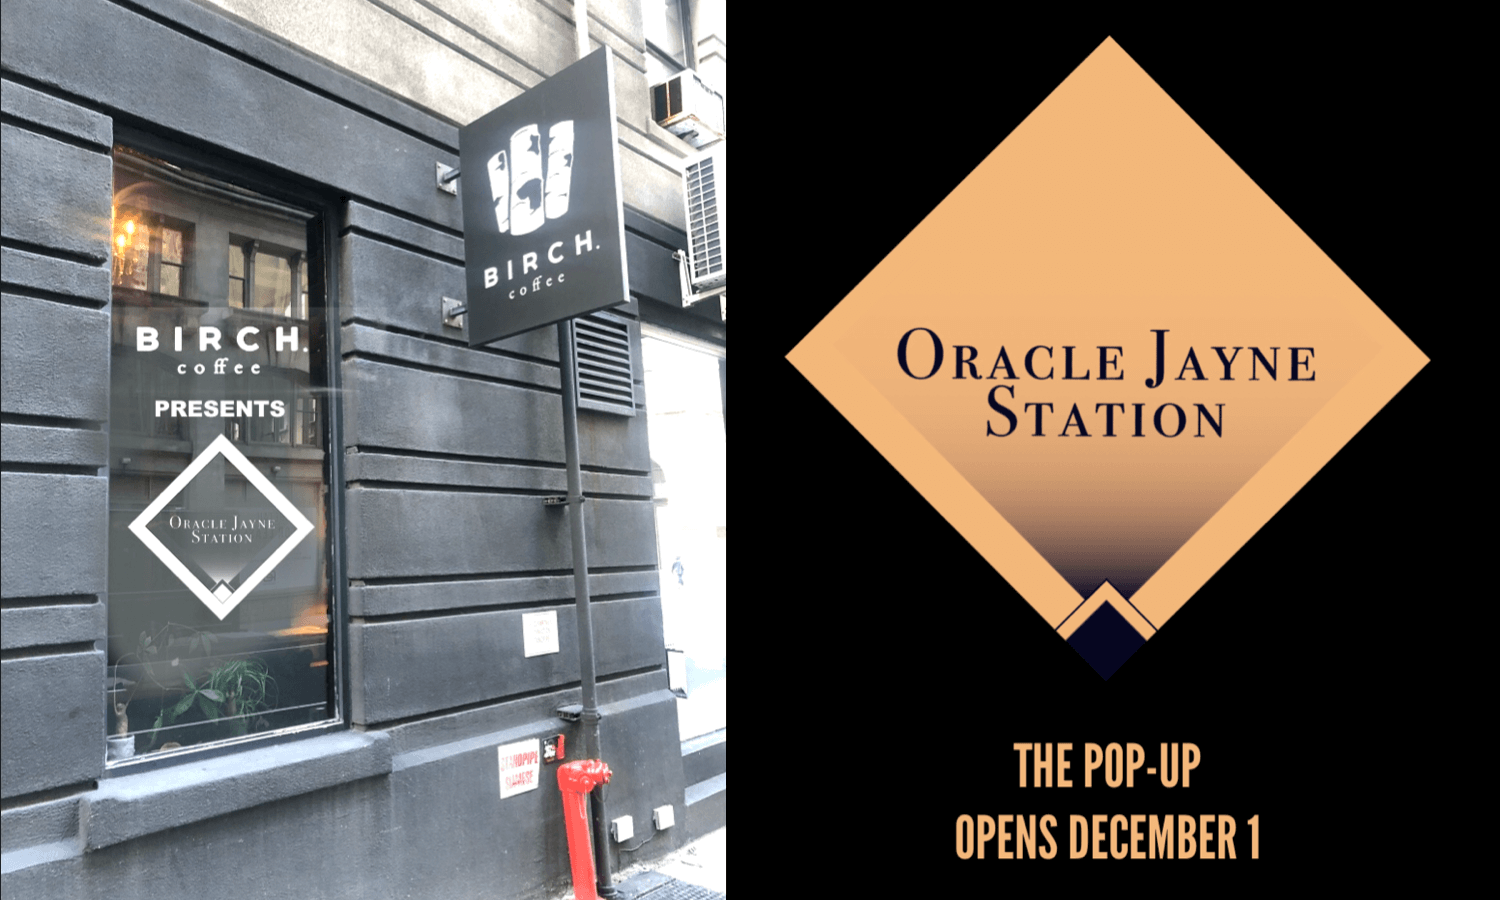 Oracle Jayne Station Pop-Up Shop! Presented by Birch Coffee!